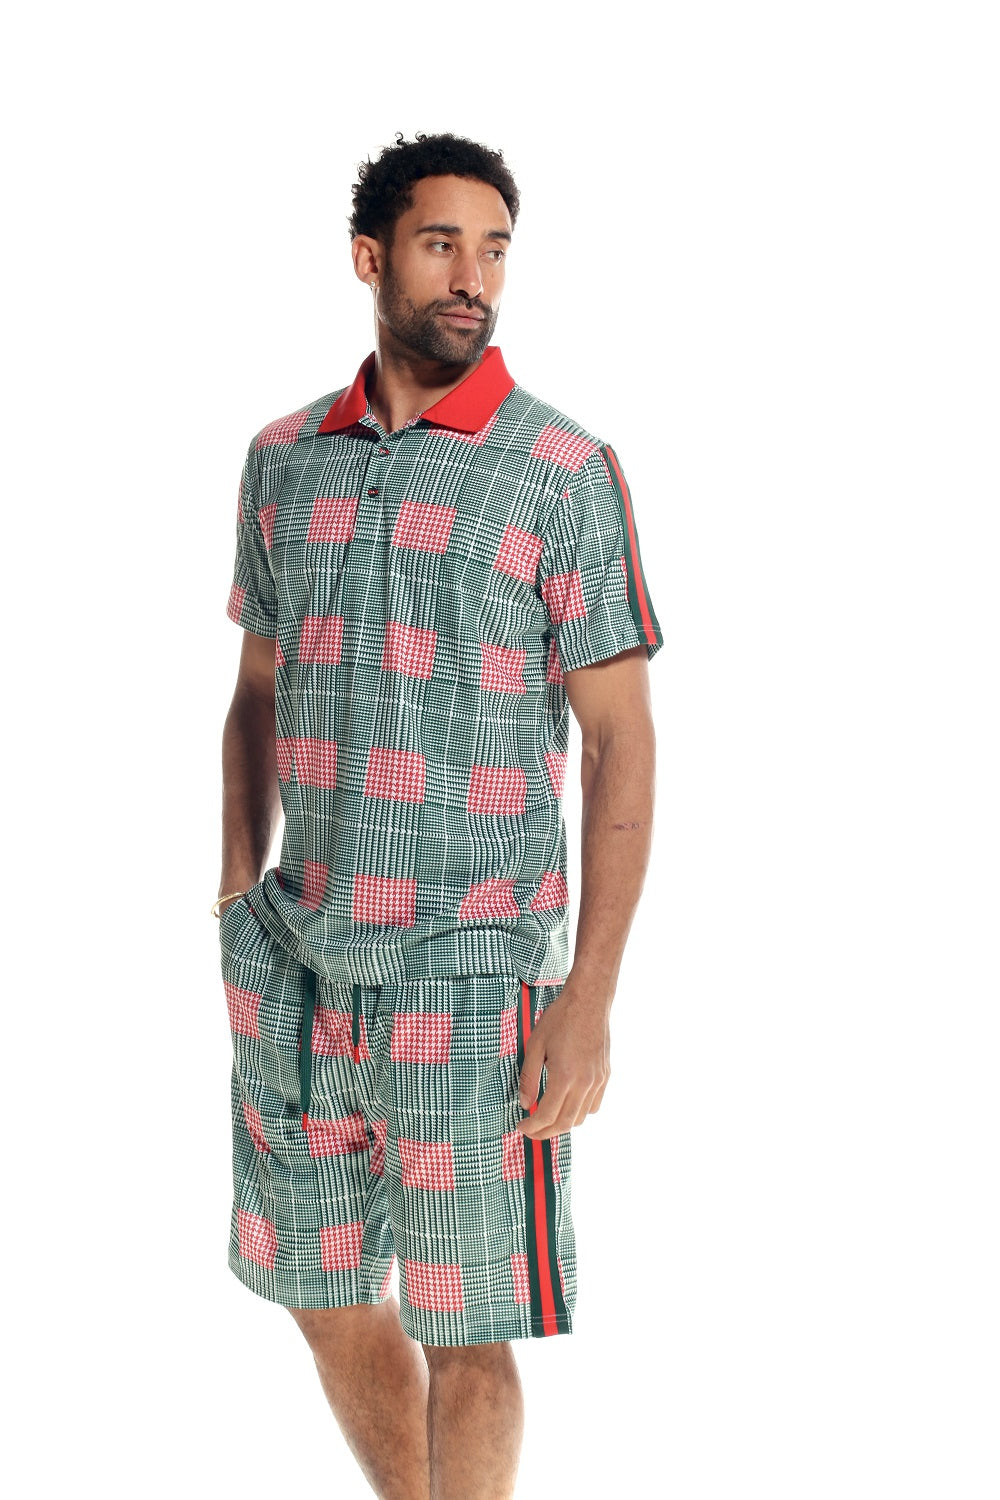 Green with Red Detail Plaid 2 Piece Shorts Set